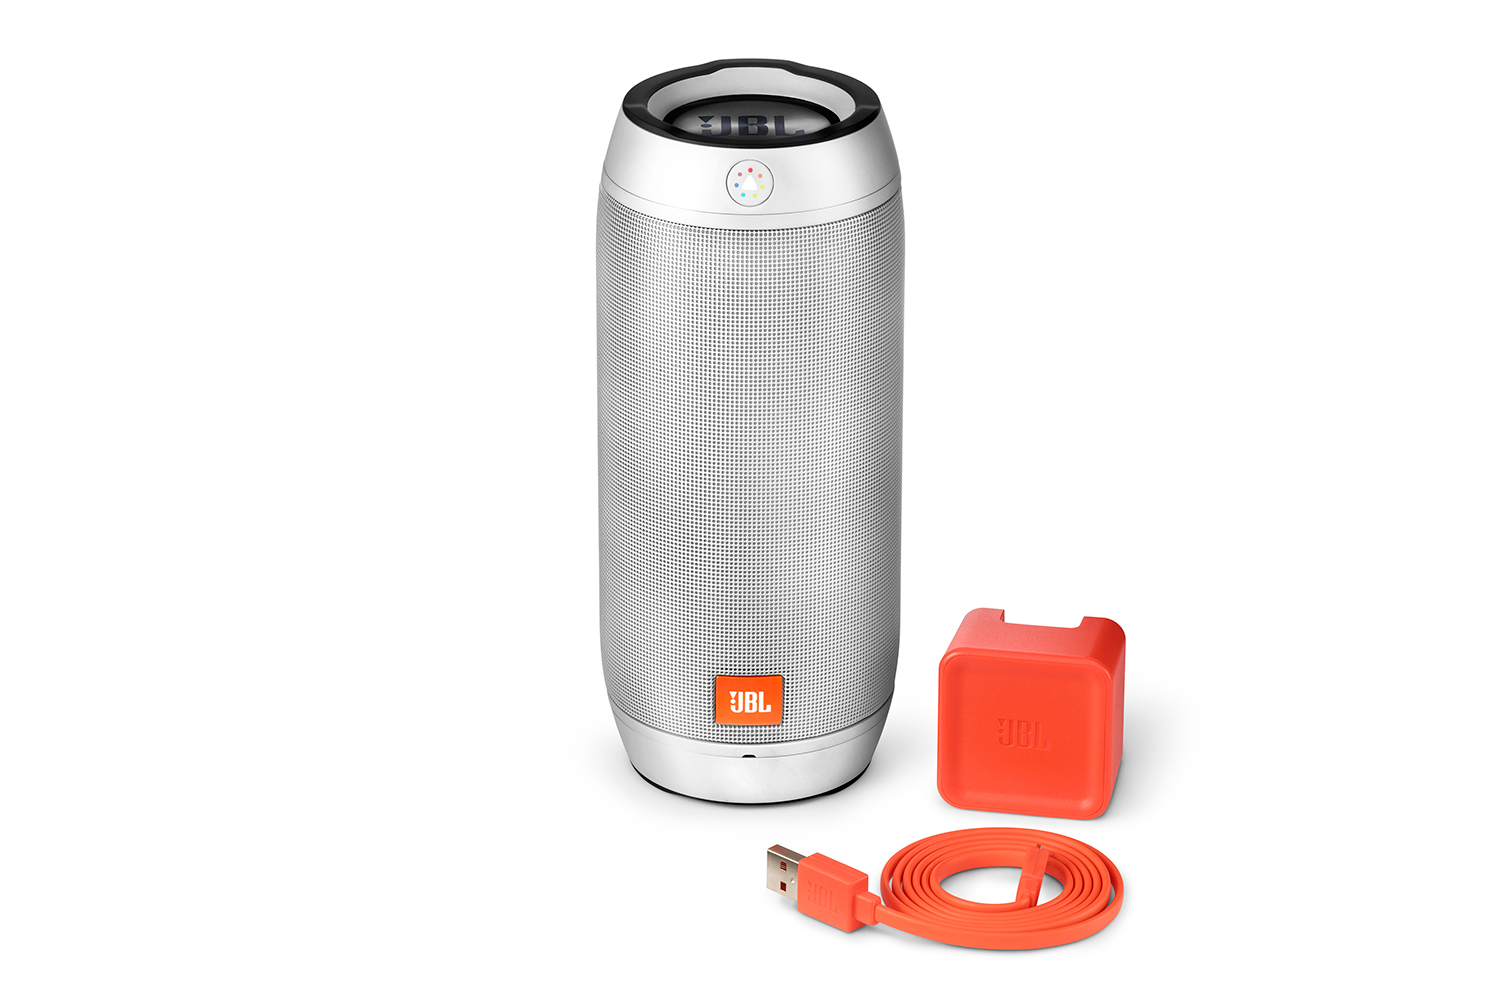 jbl new bluetooth speakers boost tv trip pulse 2 ifa 2015 image  pulse2 silver accessories